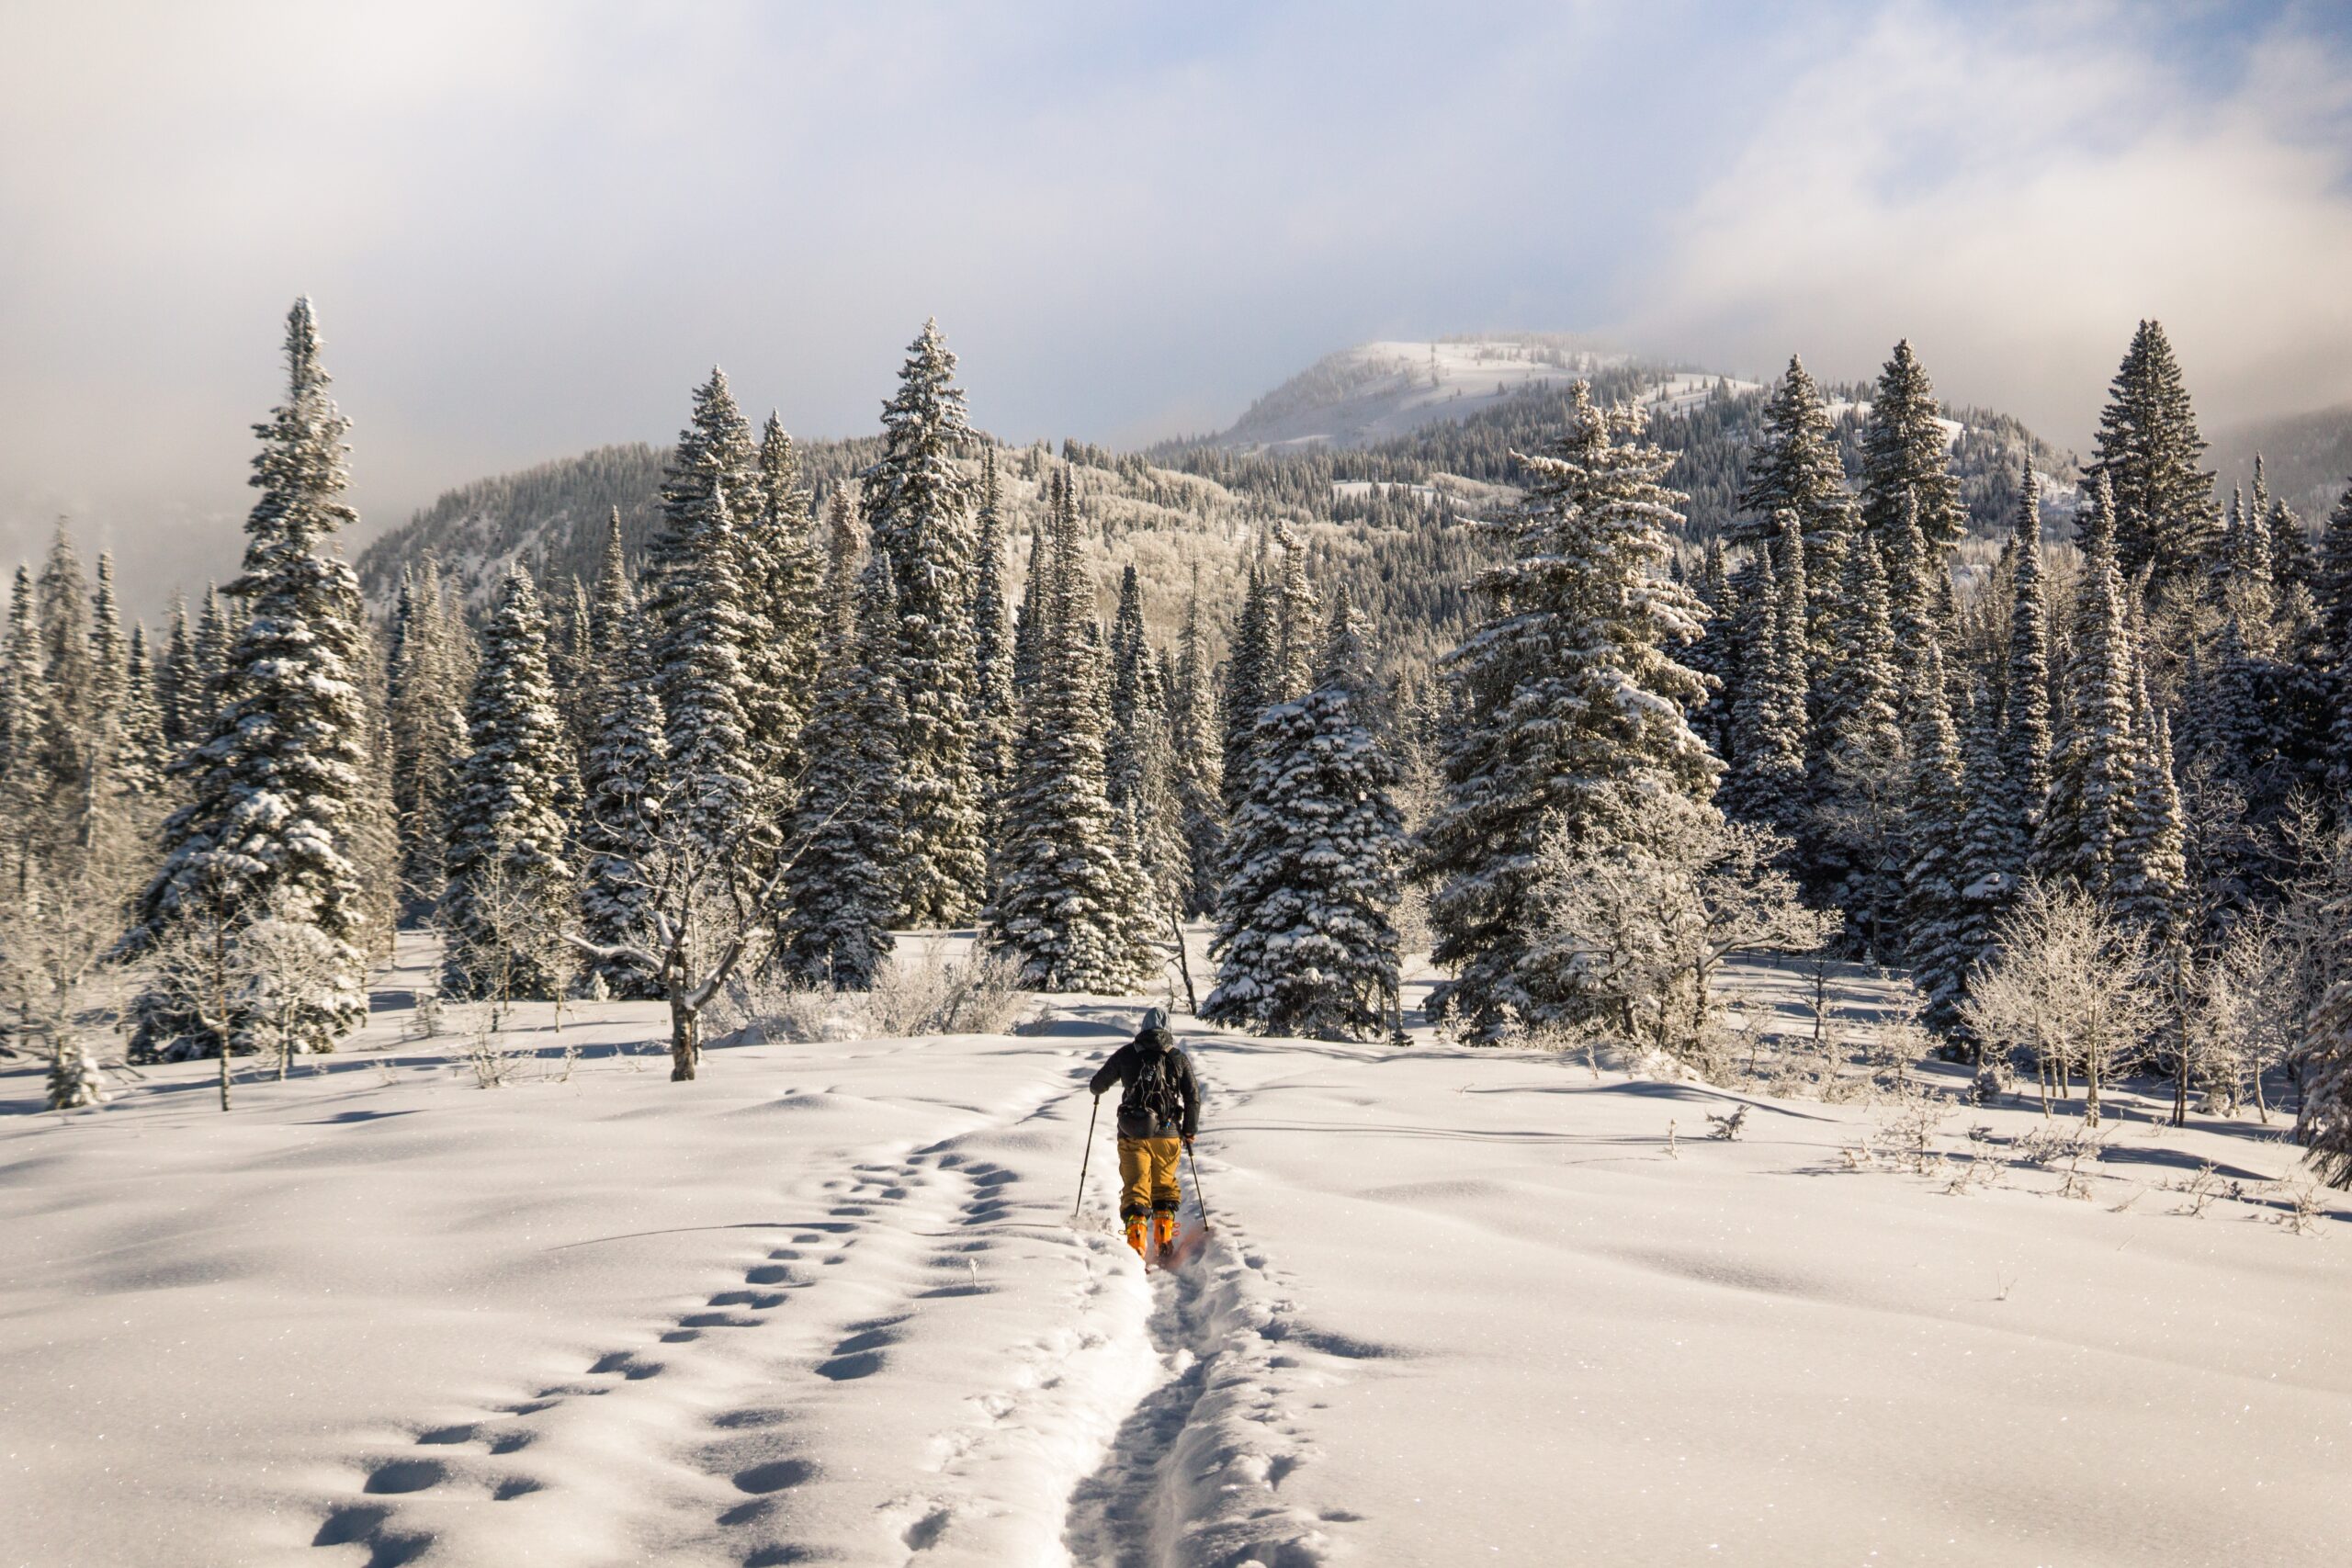 “The Benefits of Renting Ski Equipment for a Hassle-Free Winter Adventure”